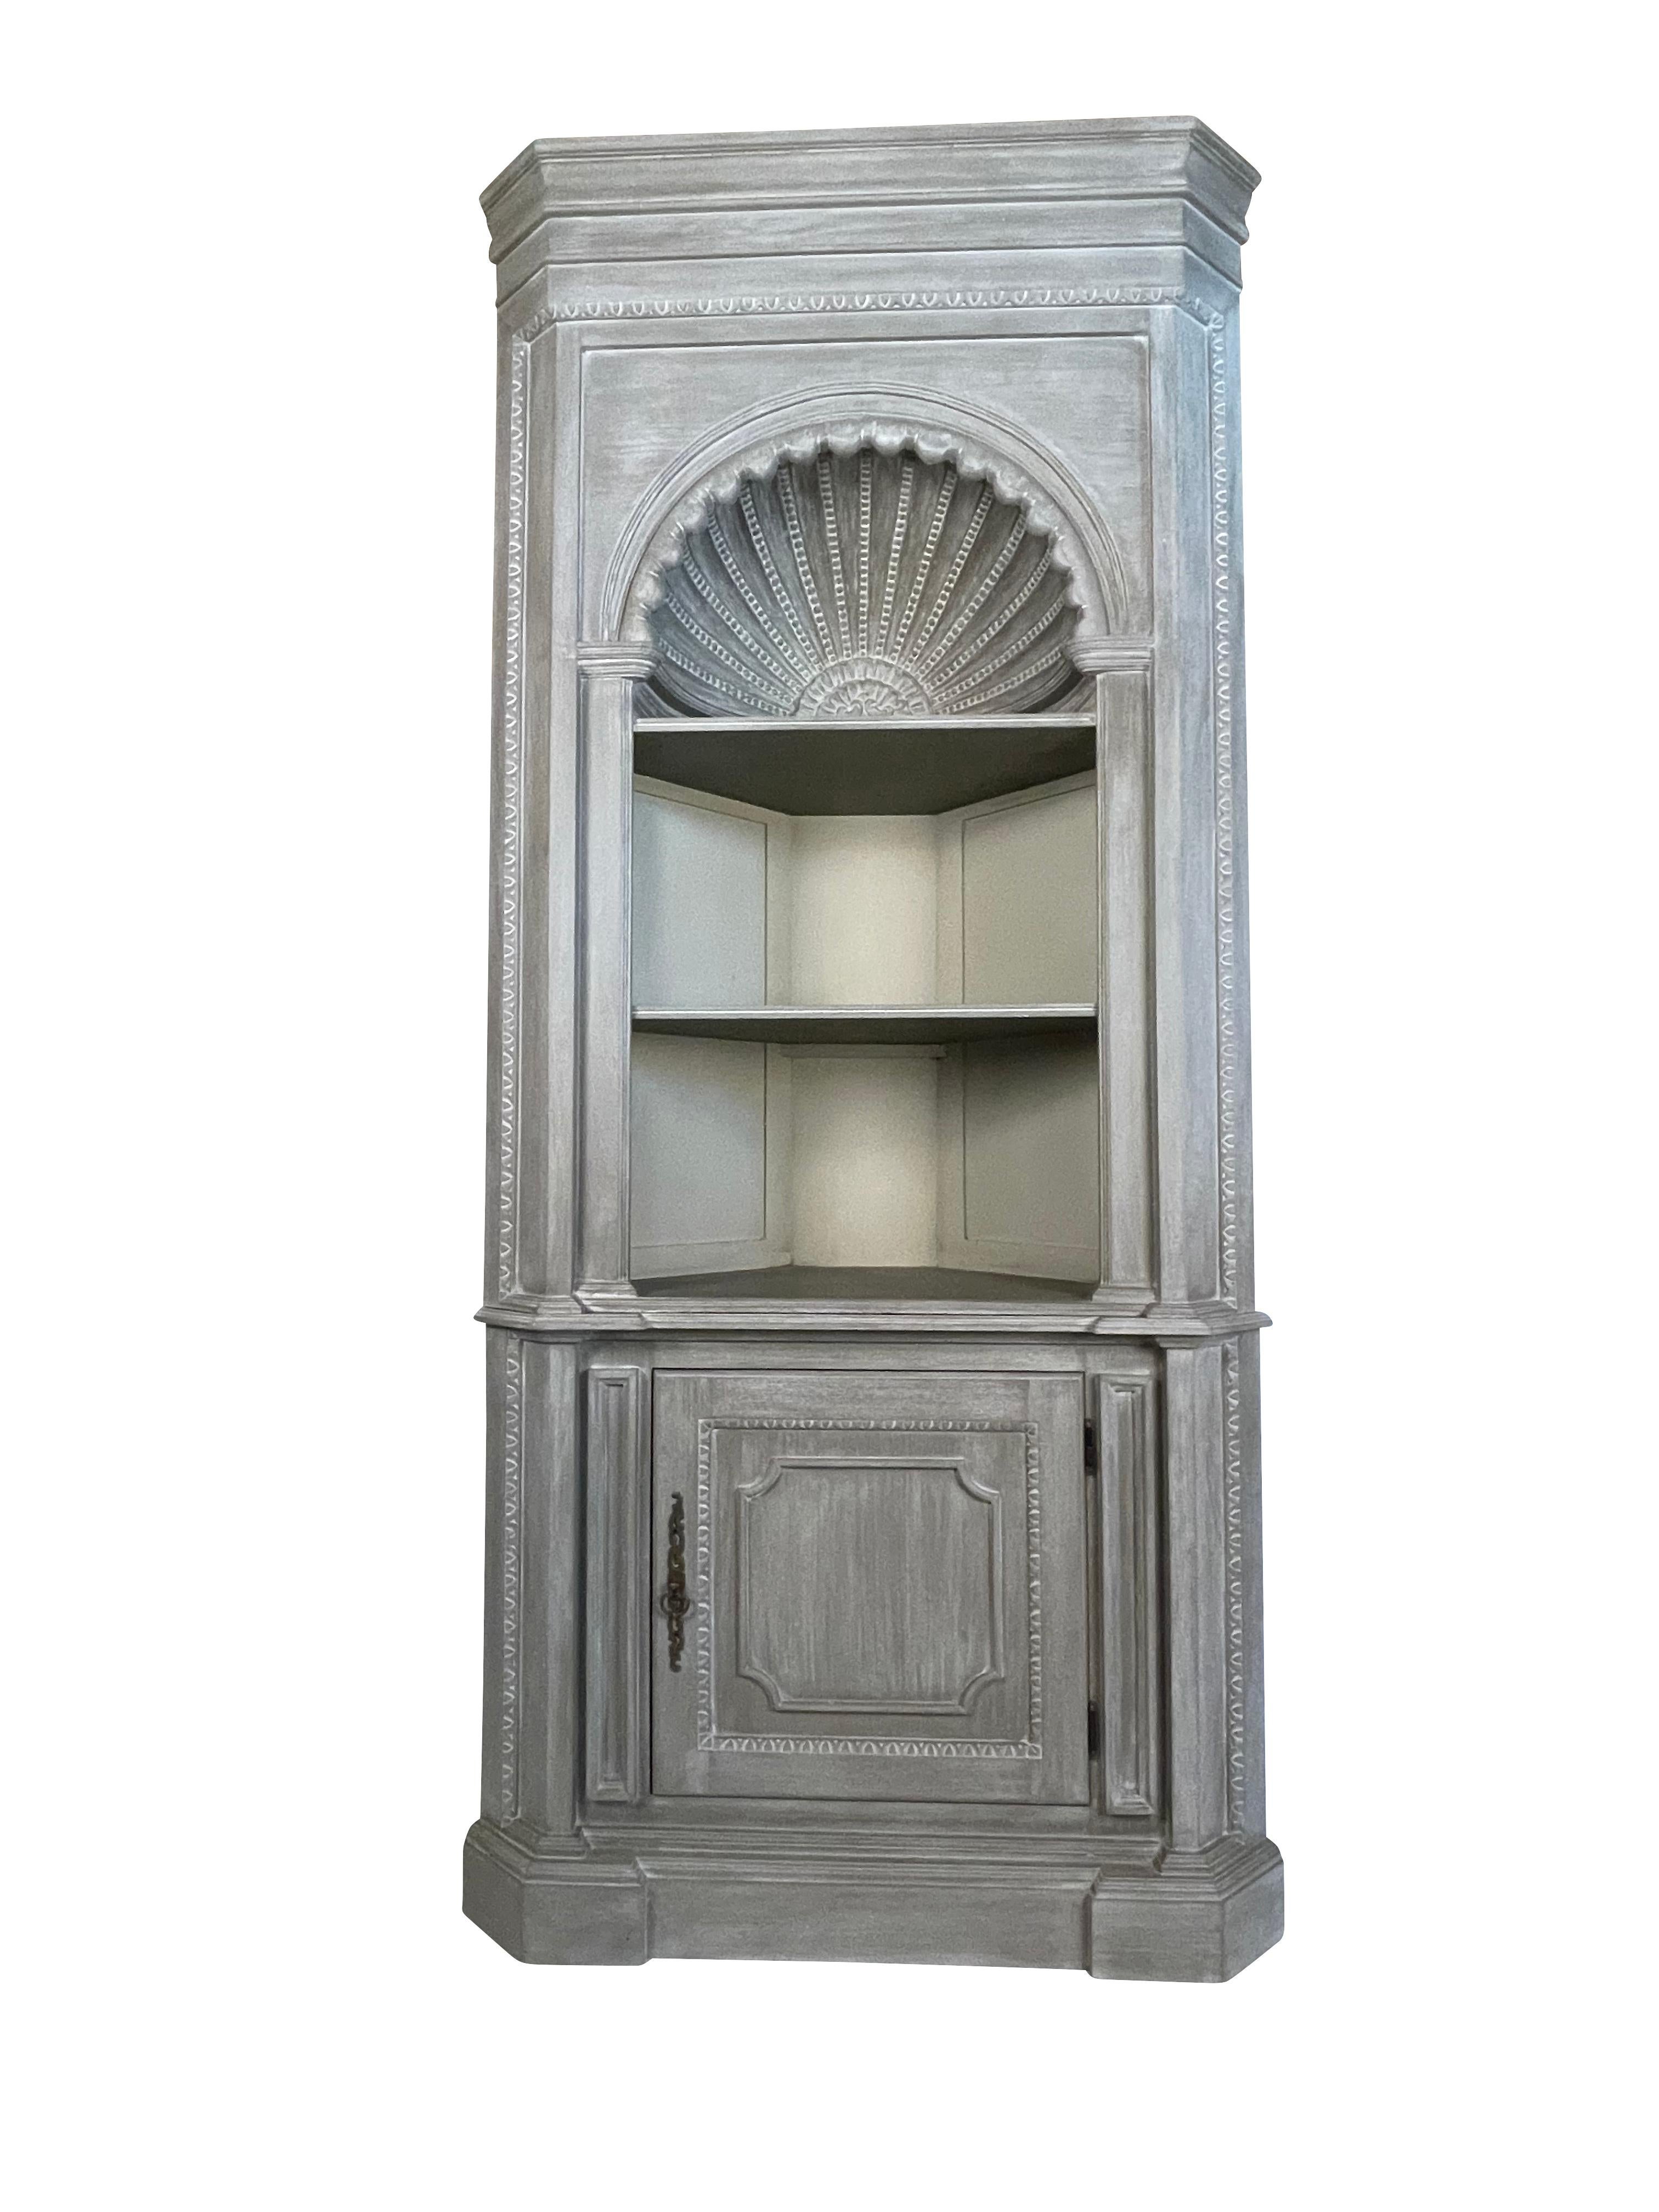 Shell carved grey painted Country French style corner cabinet cupboard
Country French style two-part corner cabinet with central shell accent. This impressive china cabinet/cupboard features an antiqued light grey painted finish, deep-set shell